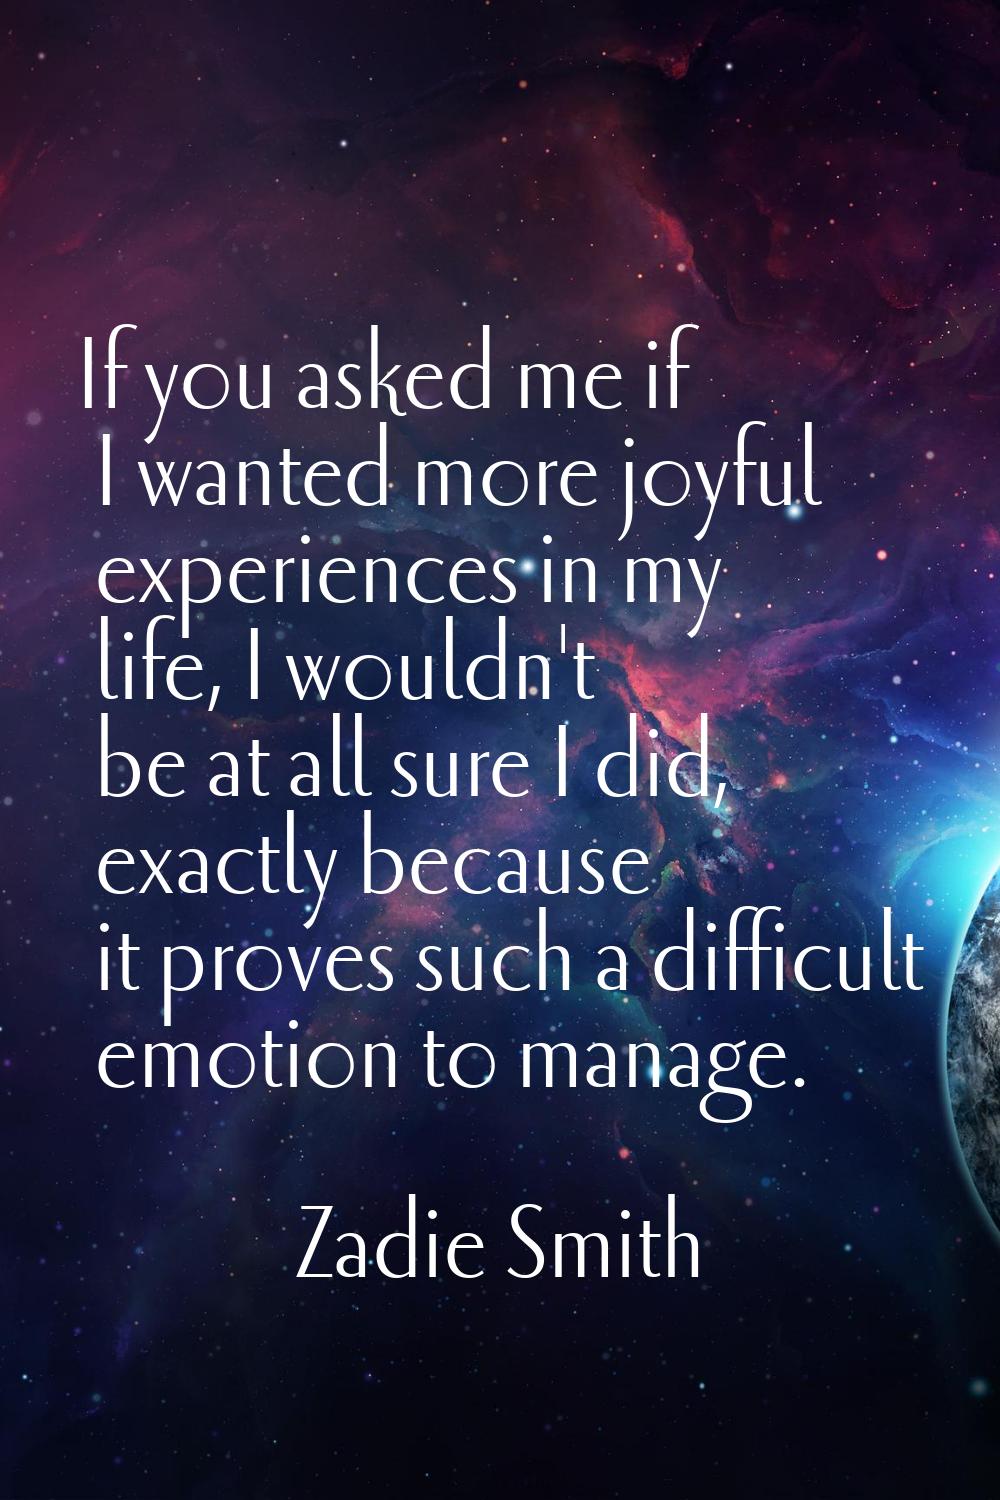 If you asked me if I wanted more joyful experiences in my life, I wouldn't be at all sure I did, ex